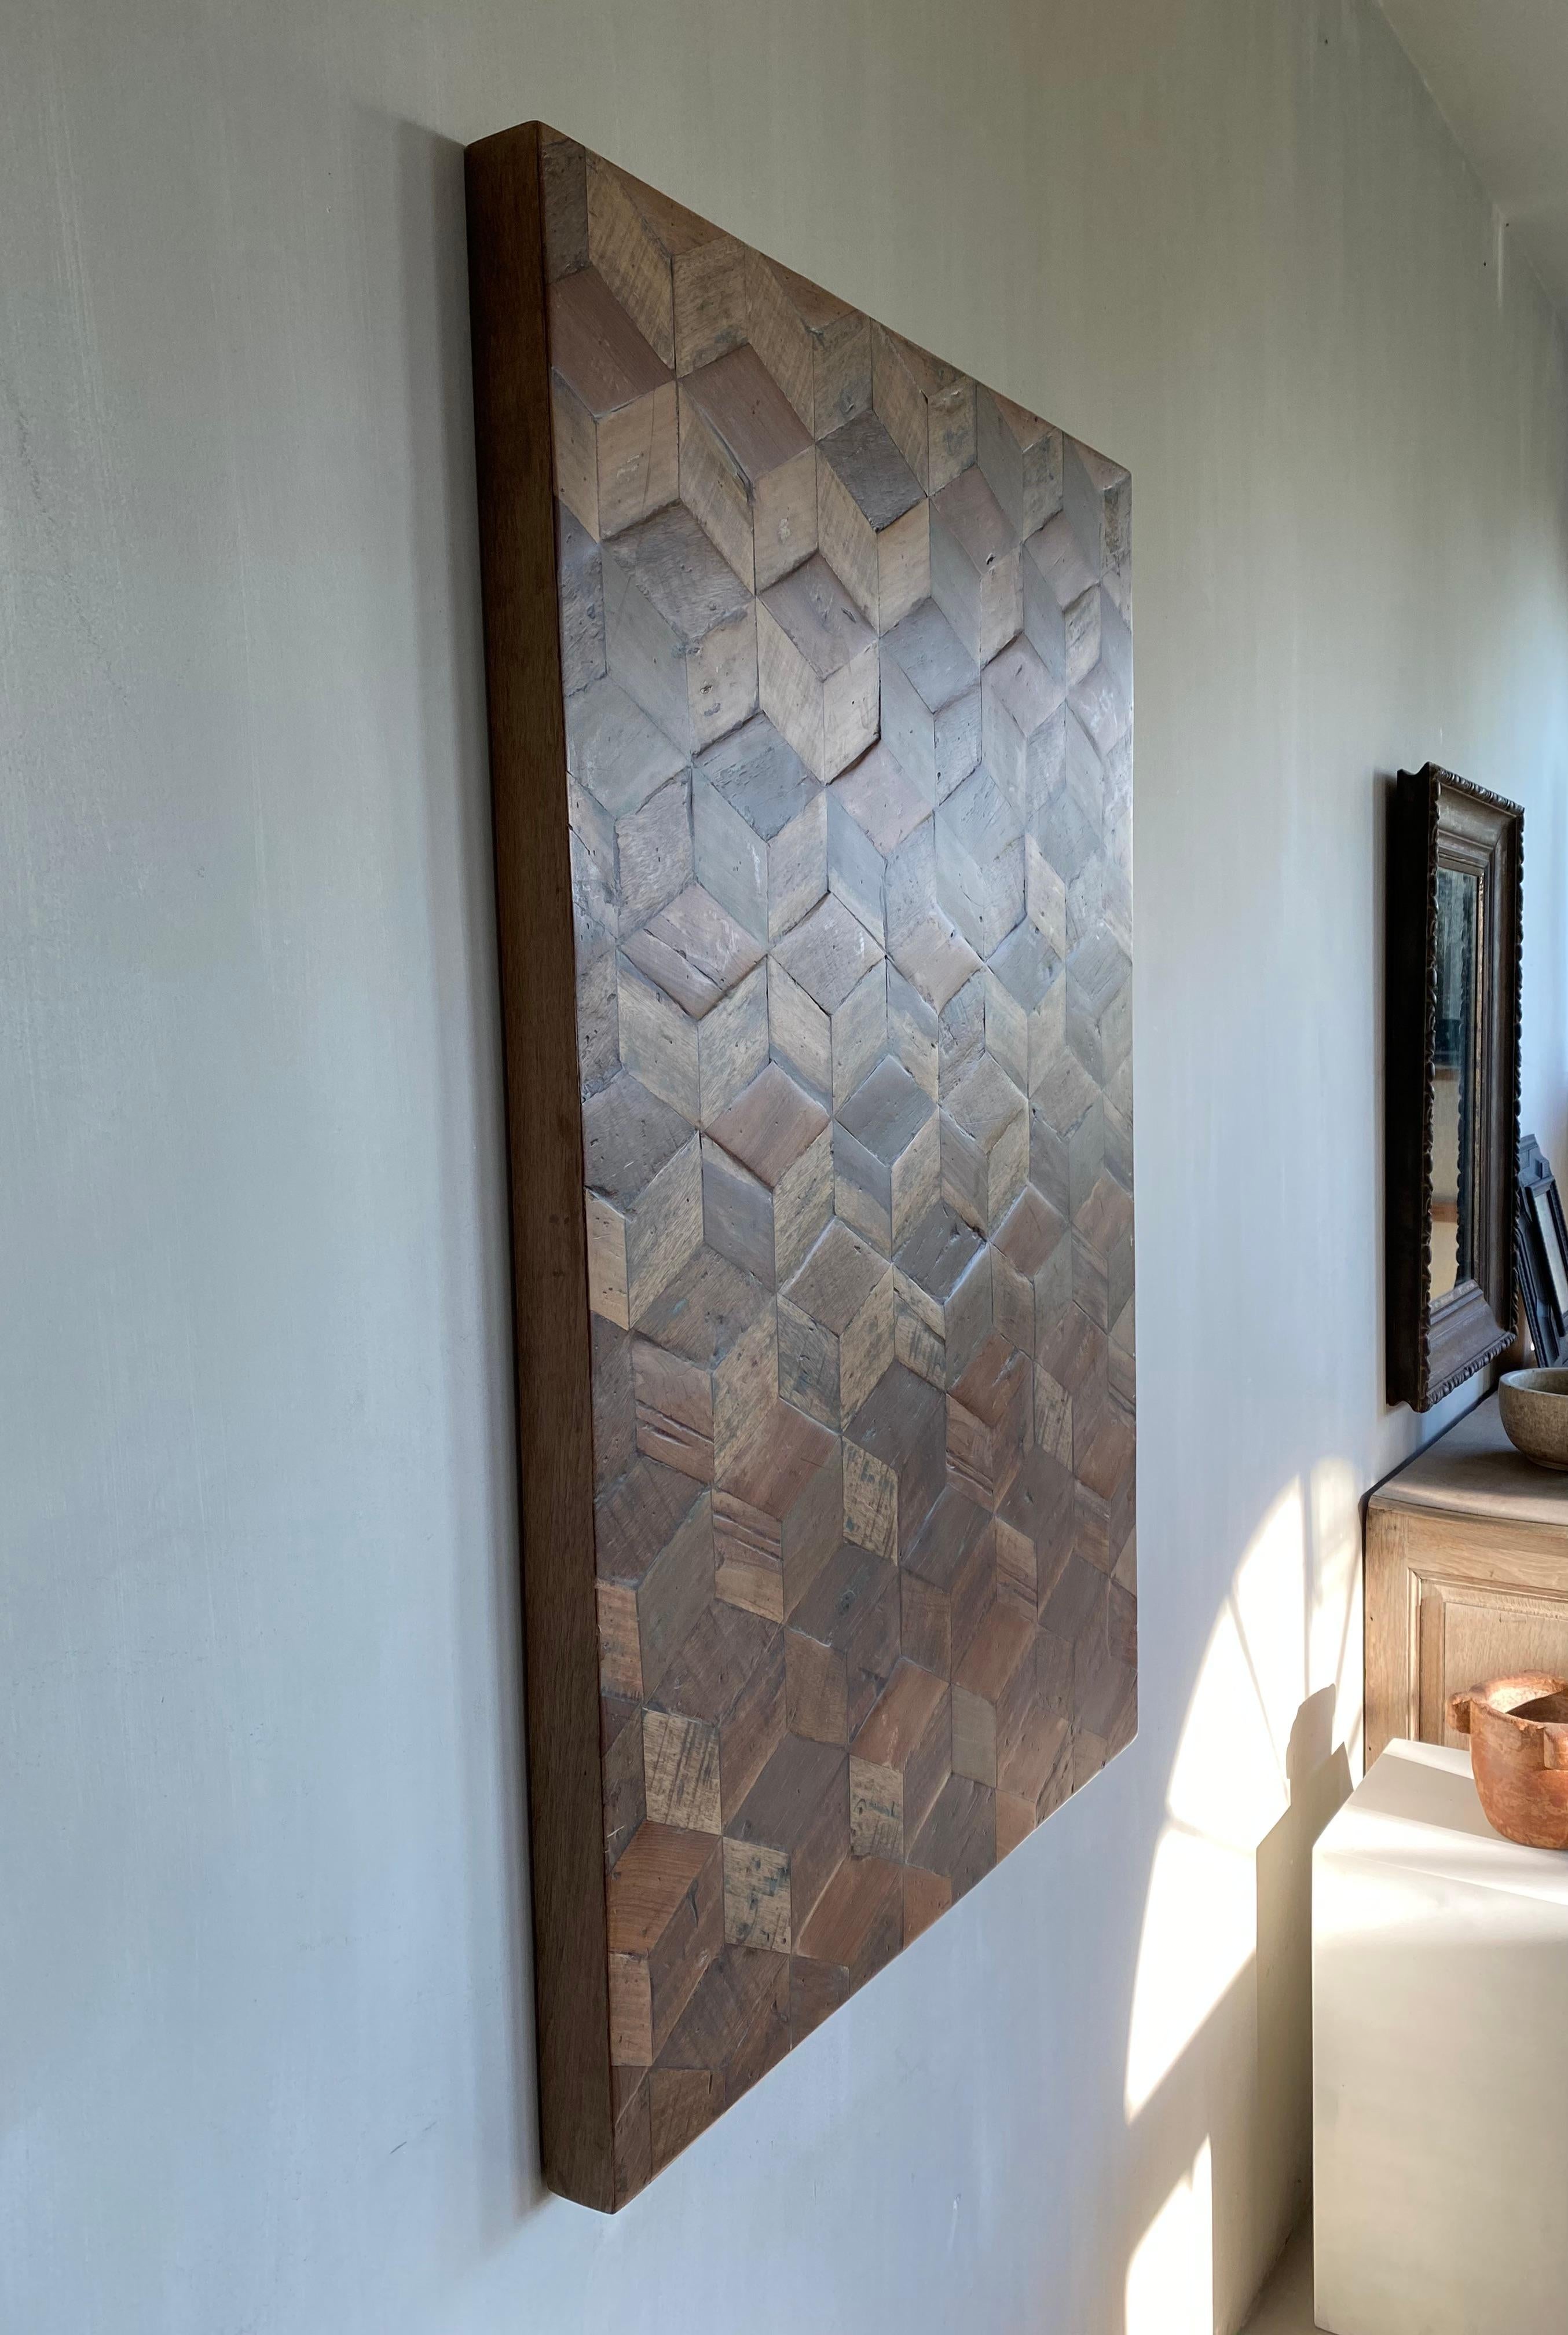 This beautiful craftwork by an unknown creator is a beautiful interplay of three-dimensional cubes in recycled wood.
The sculpted cubes stand on a wooden plate.

Earthy warm color tones give the whole a rest.
A vintage creation with a very